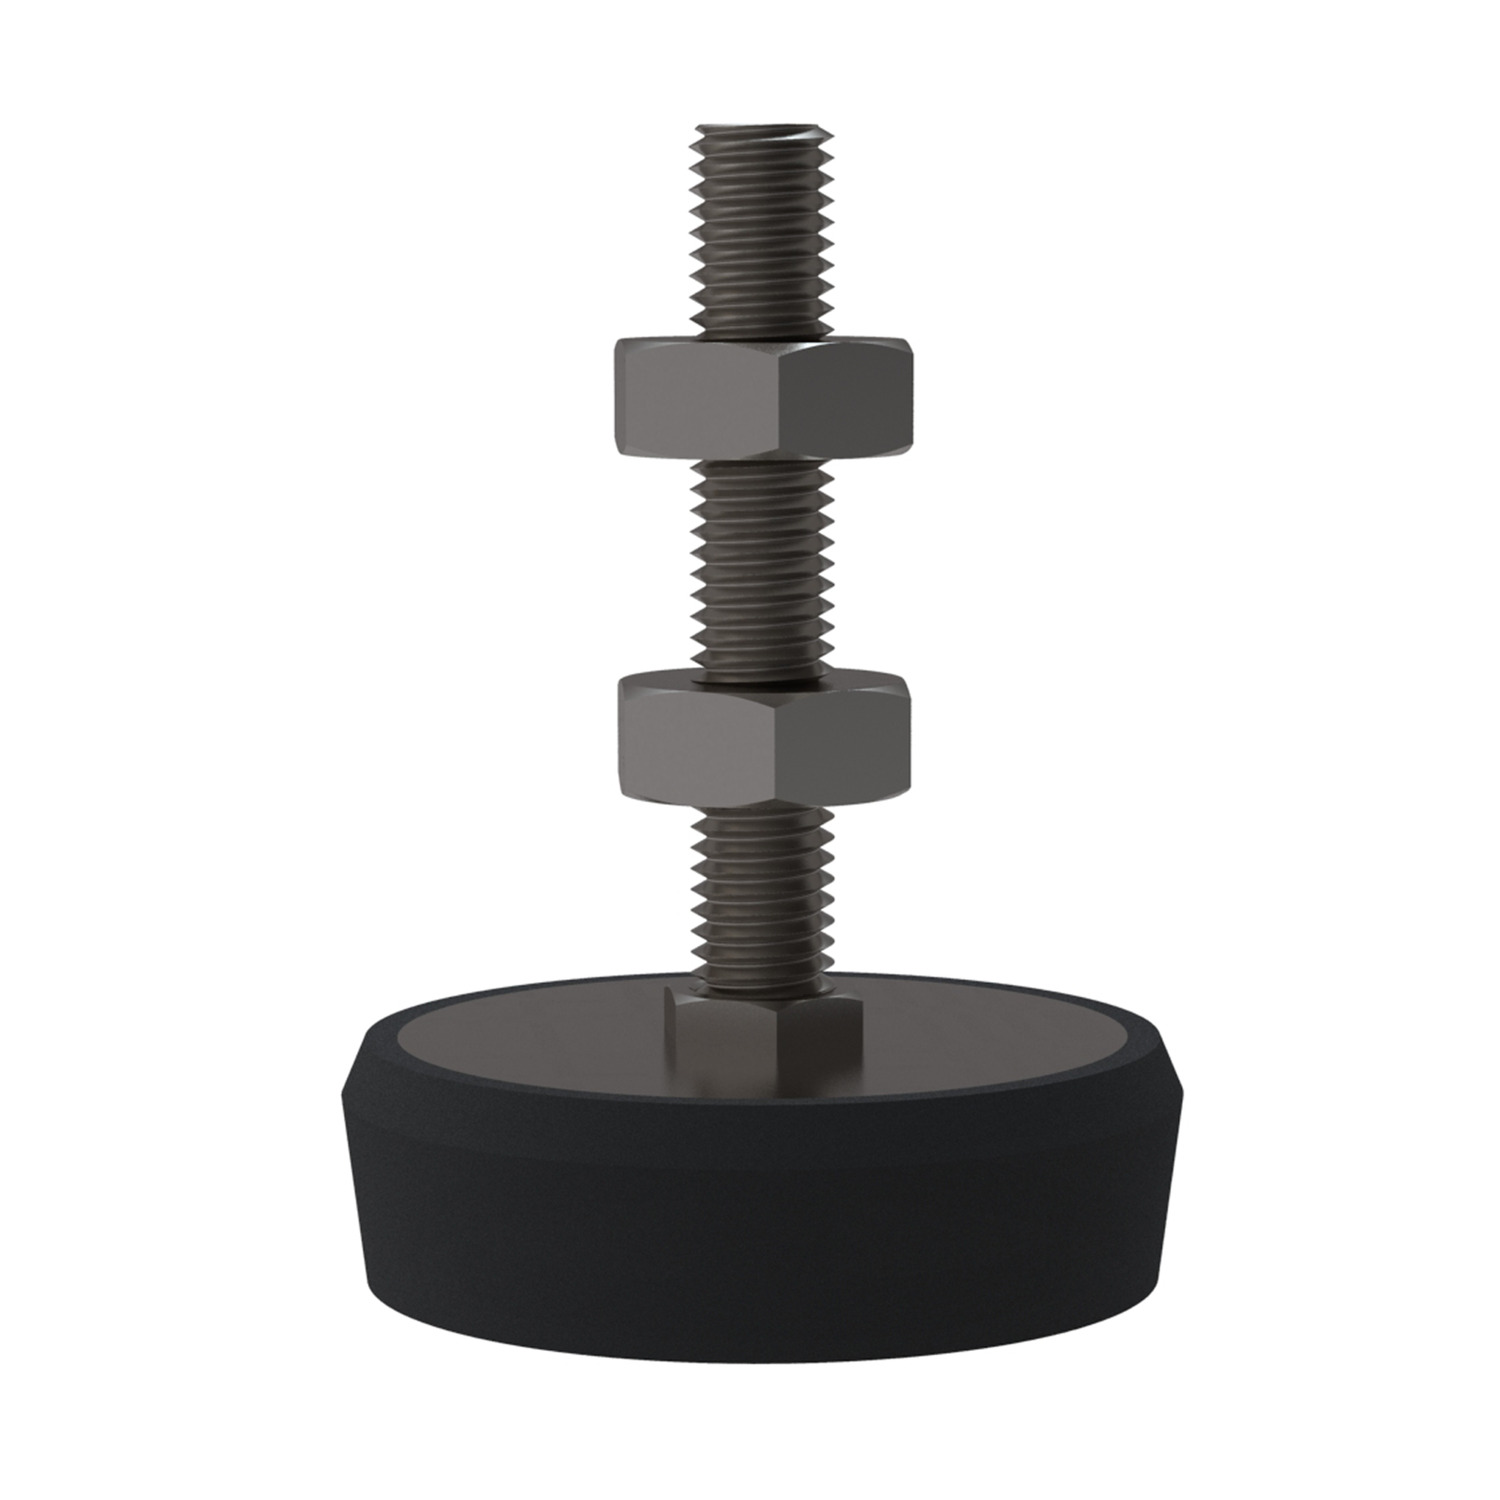 Product 34980, Stainless Machine Mounts rubber base rubber base / 